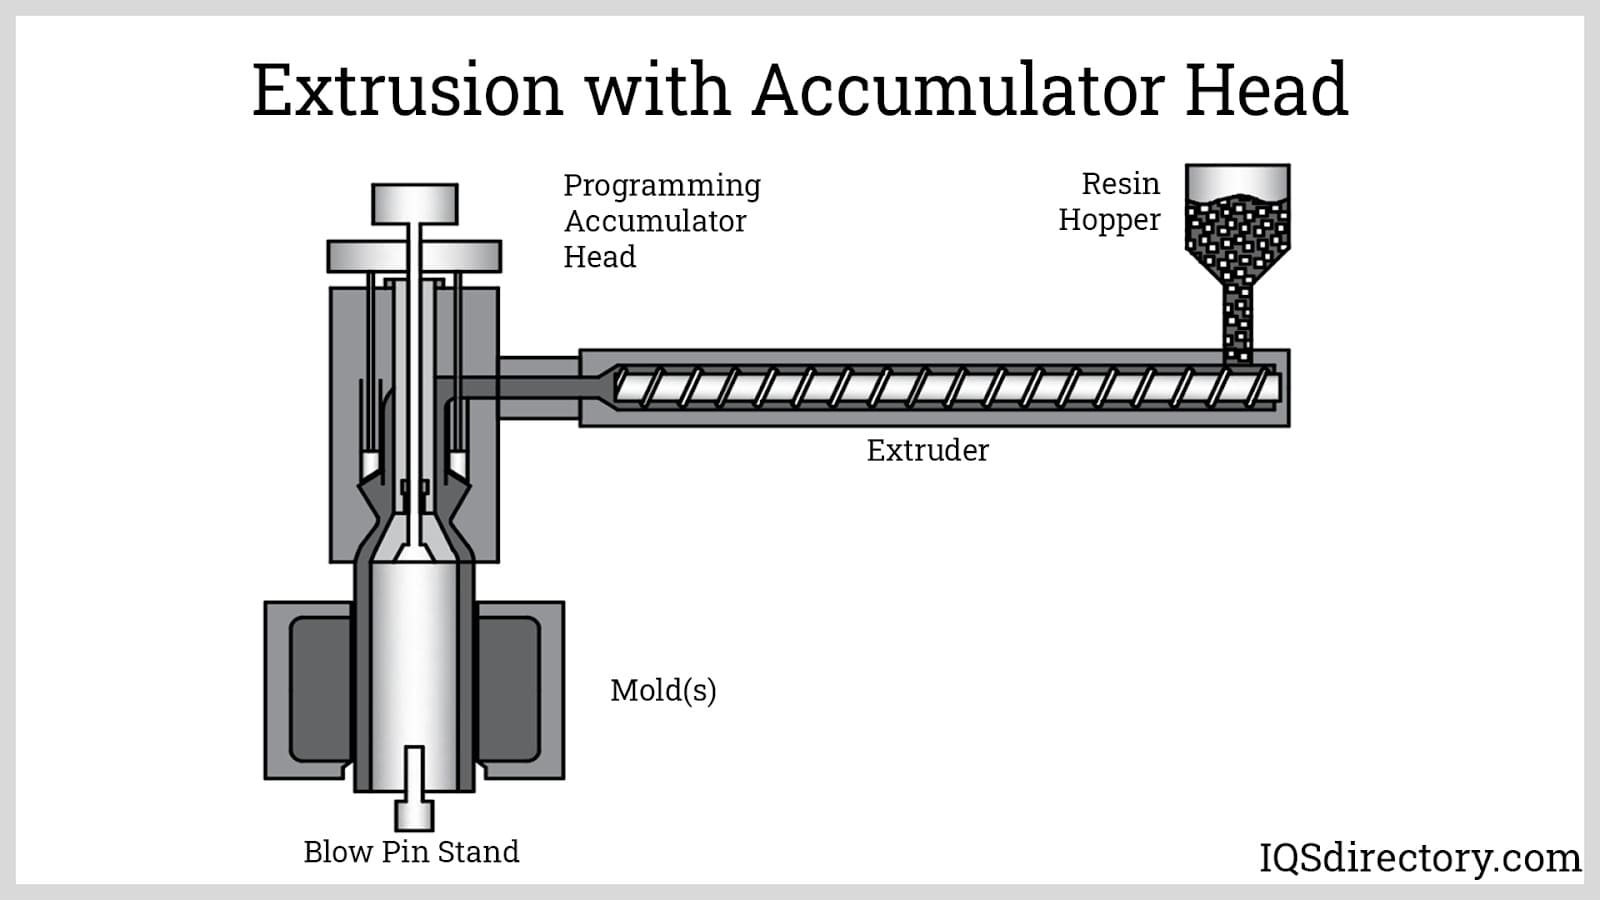 Extrusion with Accumulator Head